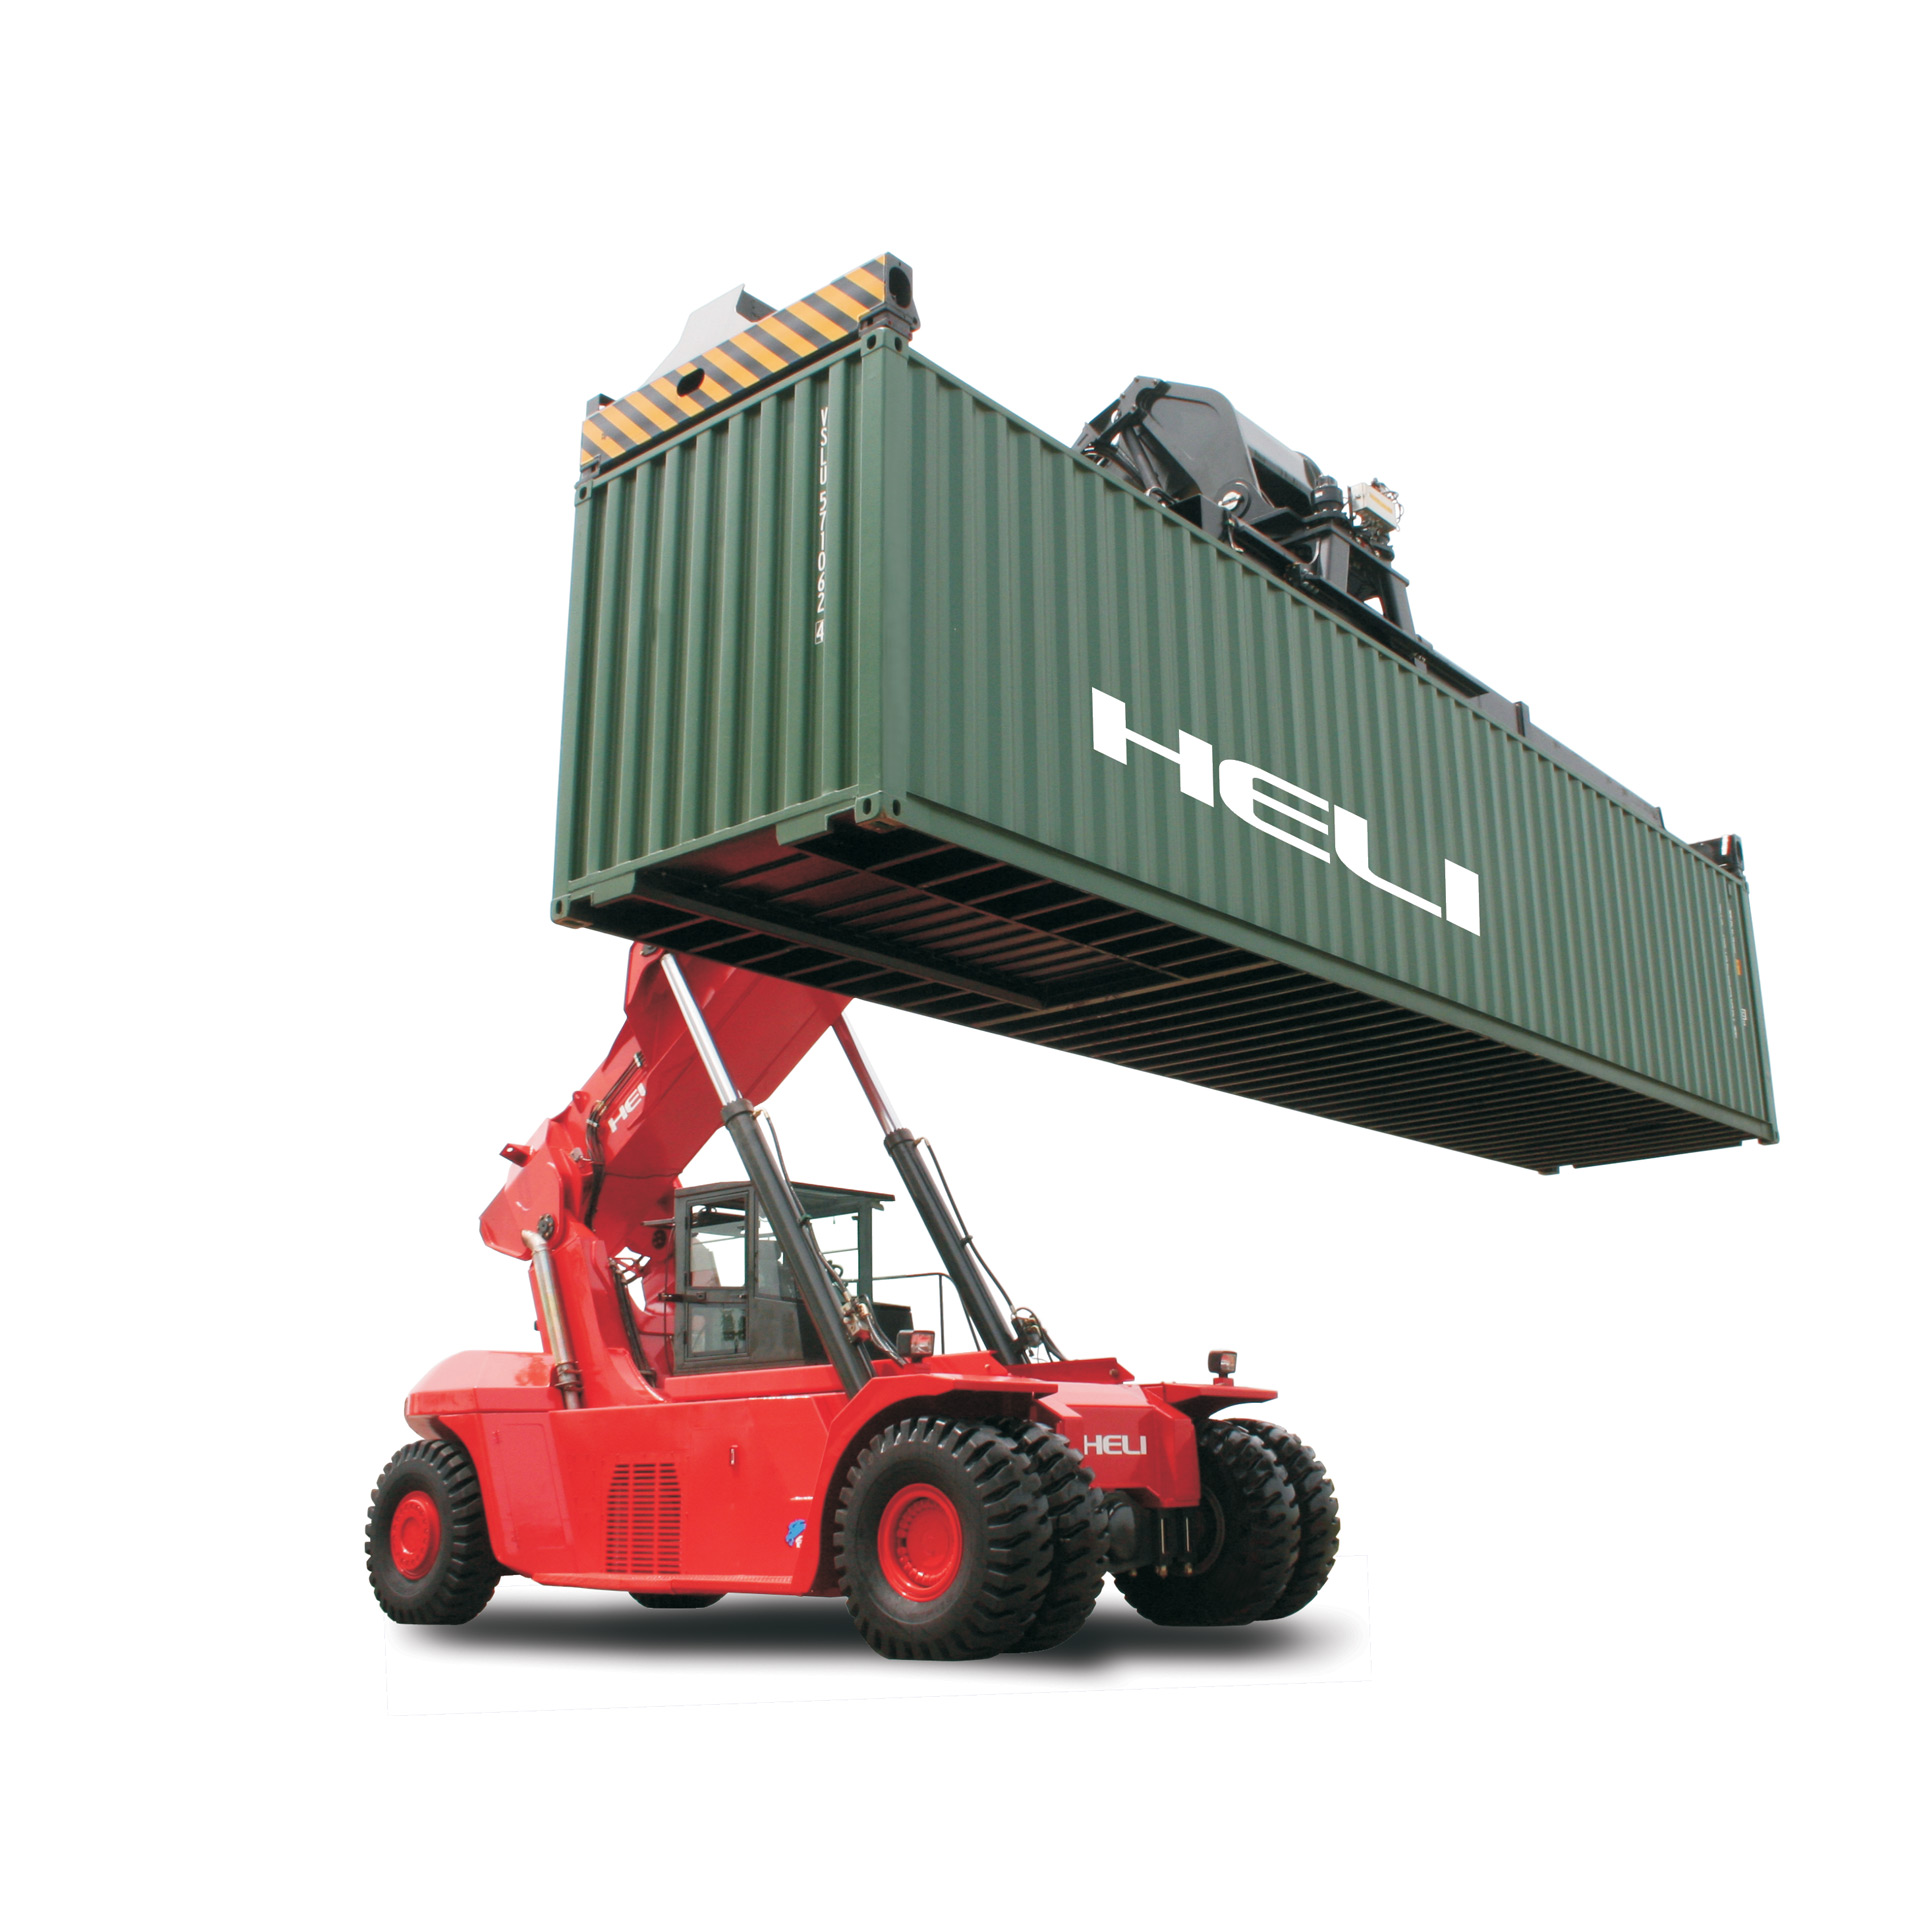 Loaded Container 45 ton Heli reach stacker